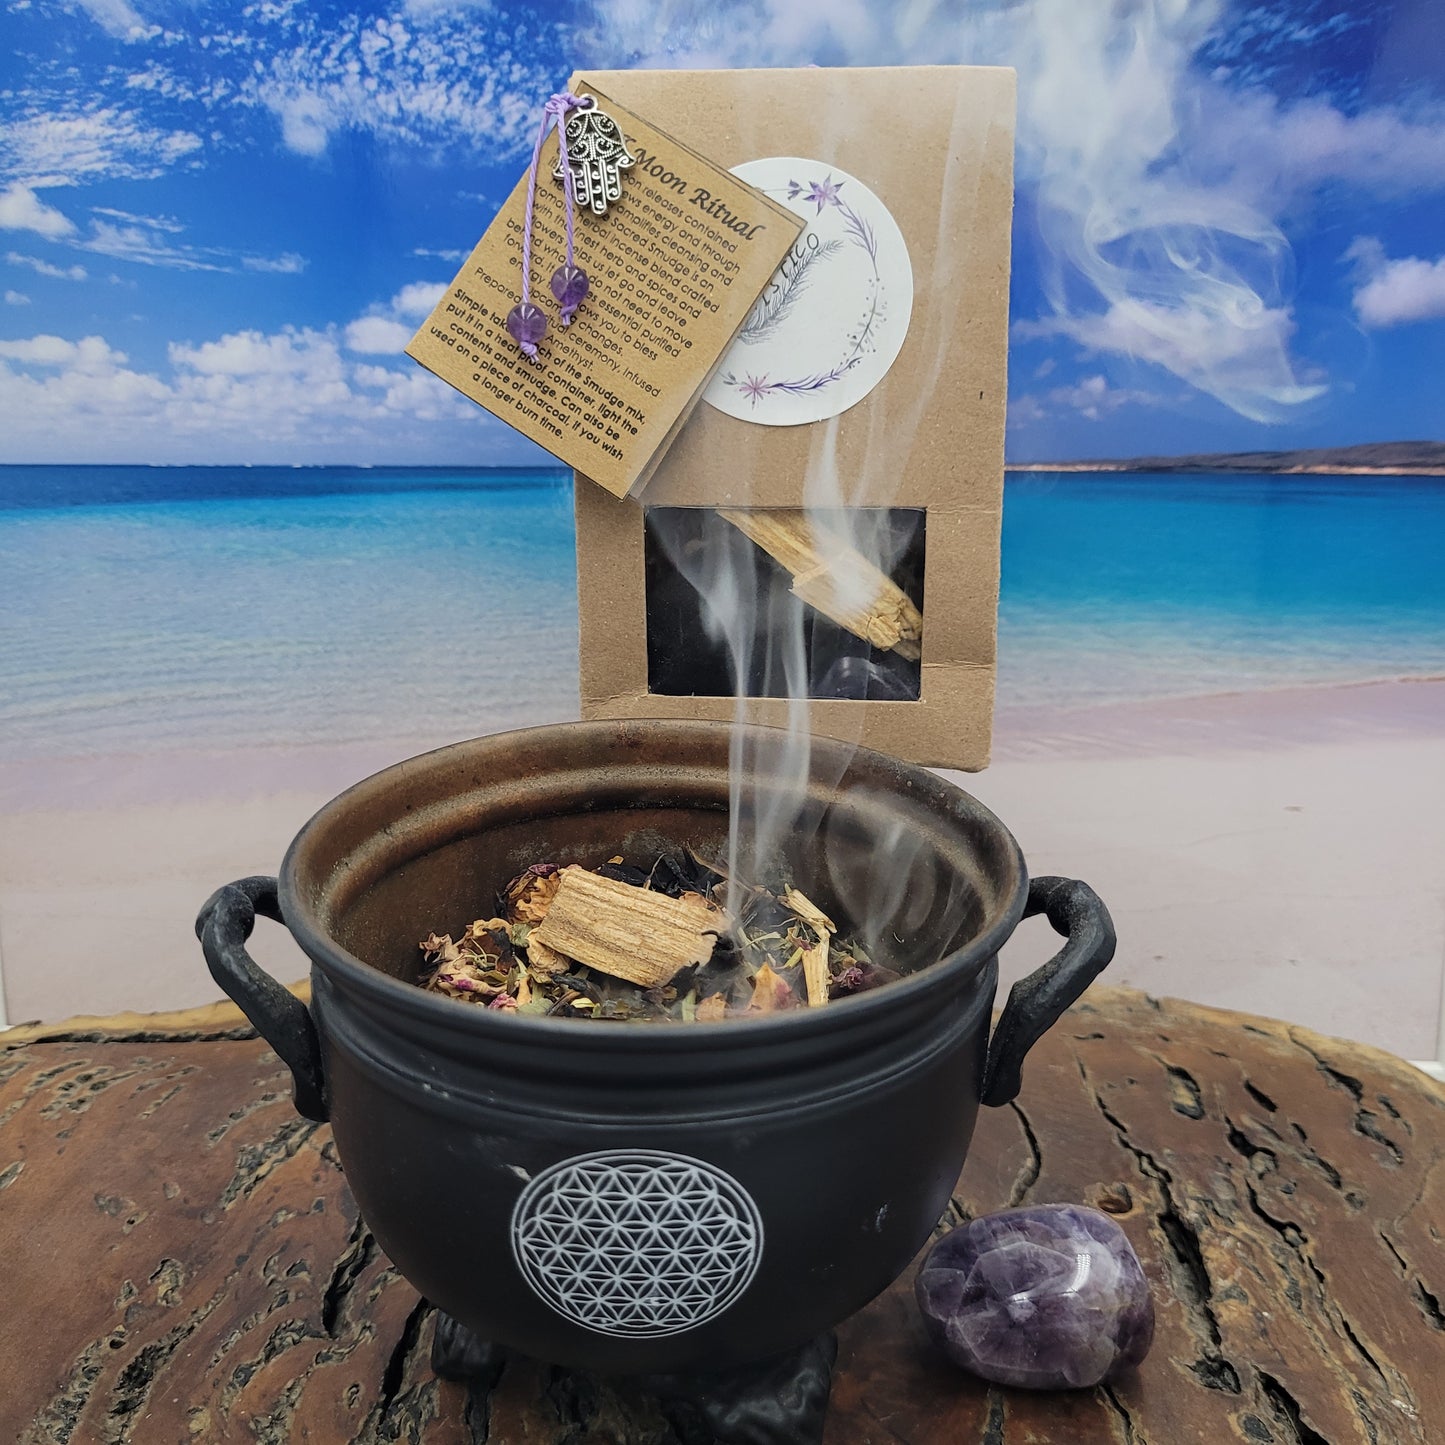 Smudge Tin Floral Cleansing & Protection